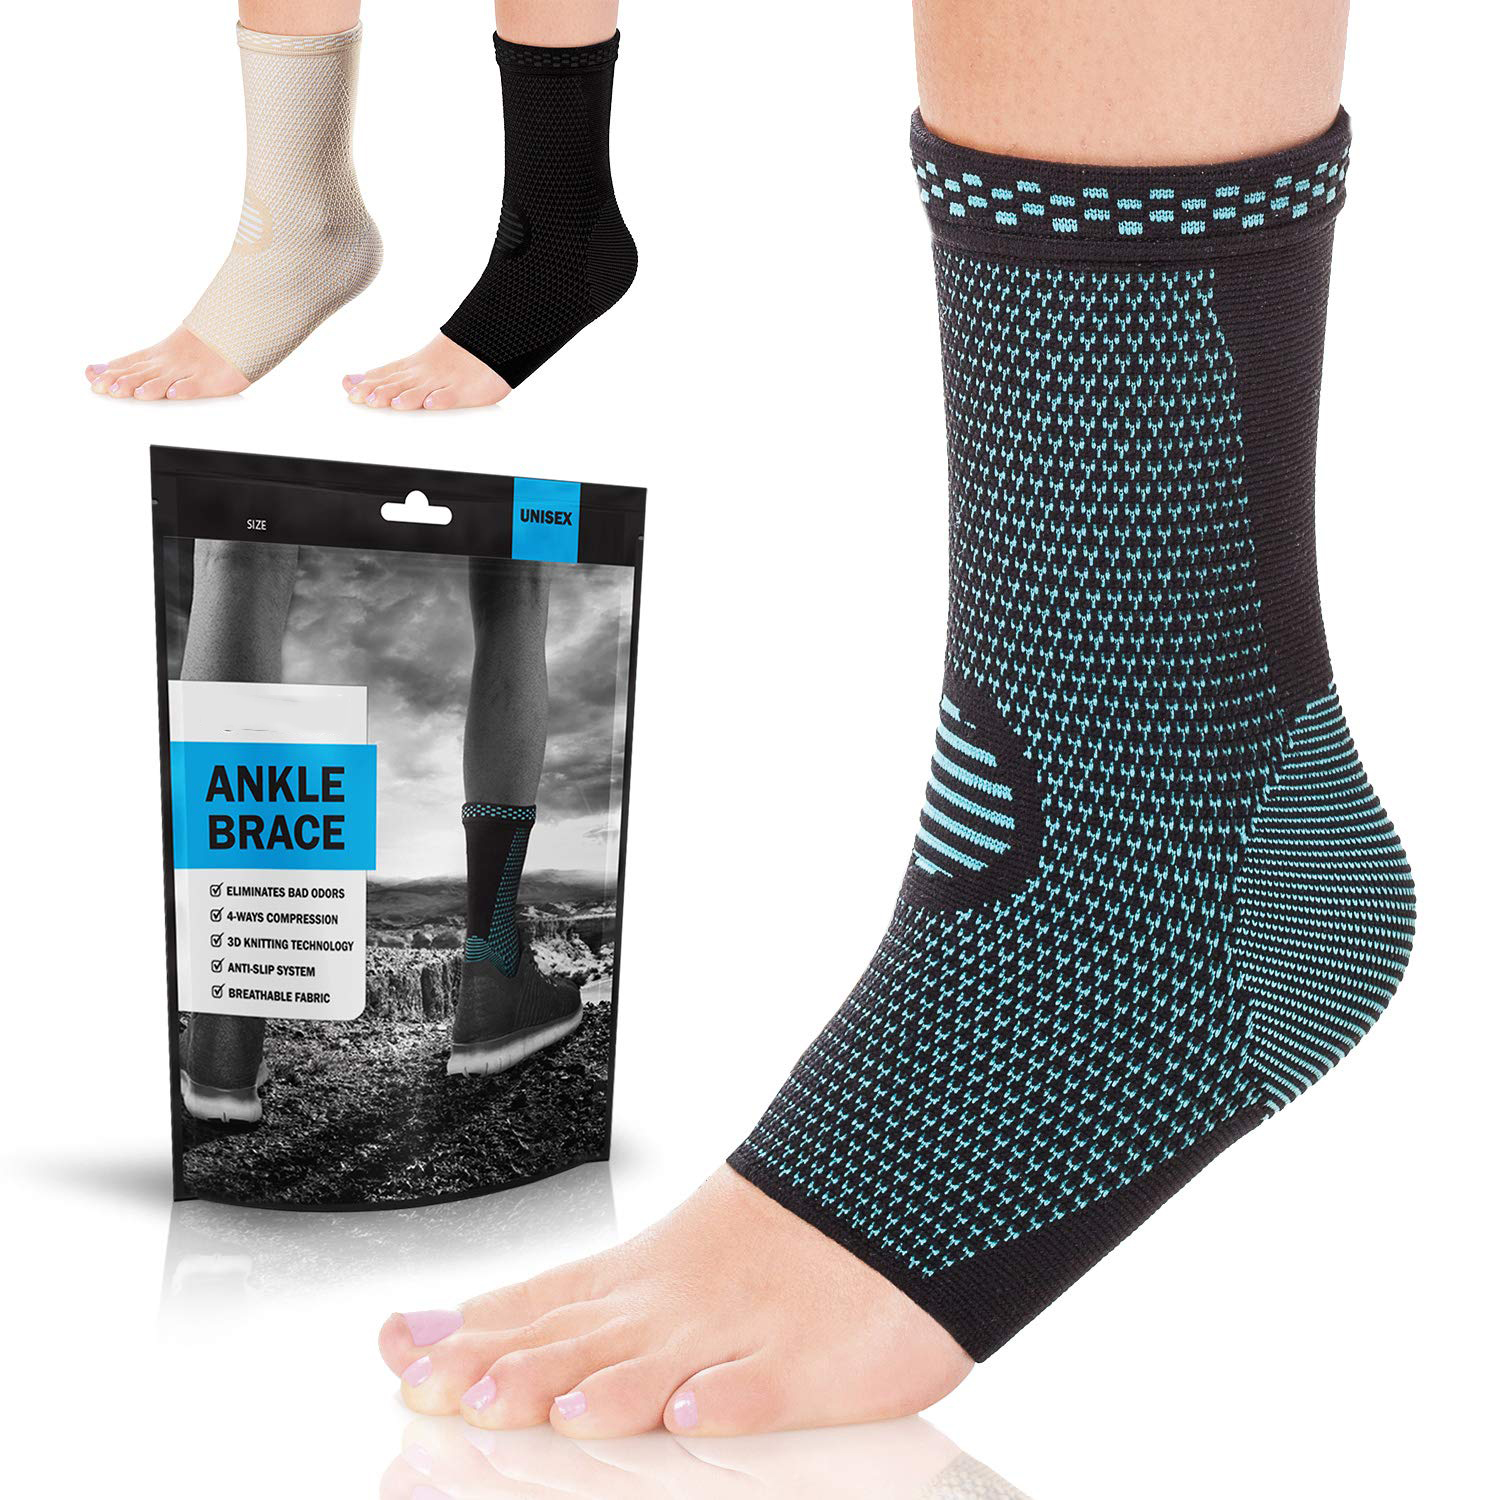 Quality Inspection for Nylon Ankle Sleeve - Ankle Brace Compression Support Sleeve (Pair) for Injury Recovery, Joint Pain and More. Achilles Tendon Support, Plantar Fasciitis Foot Socks with Arch ...